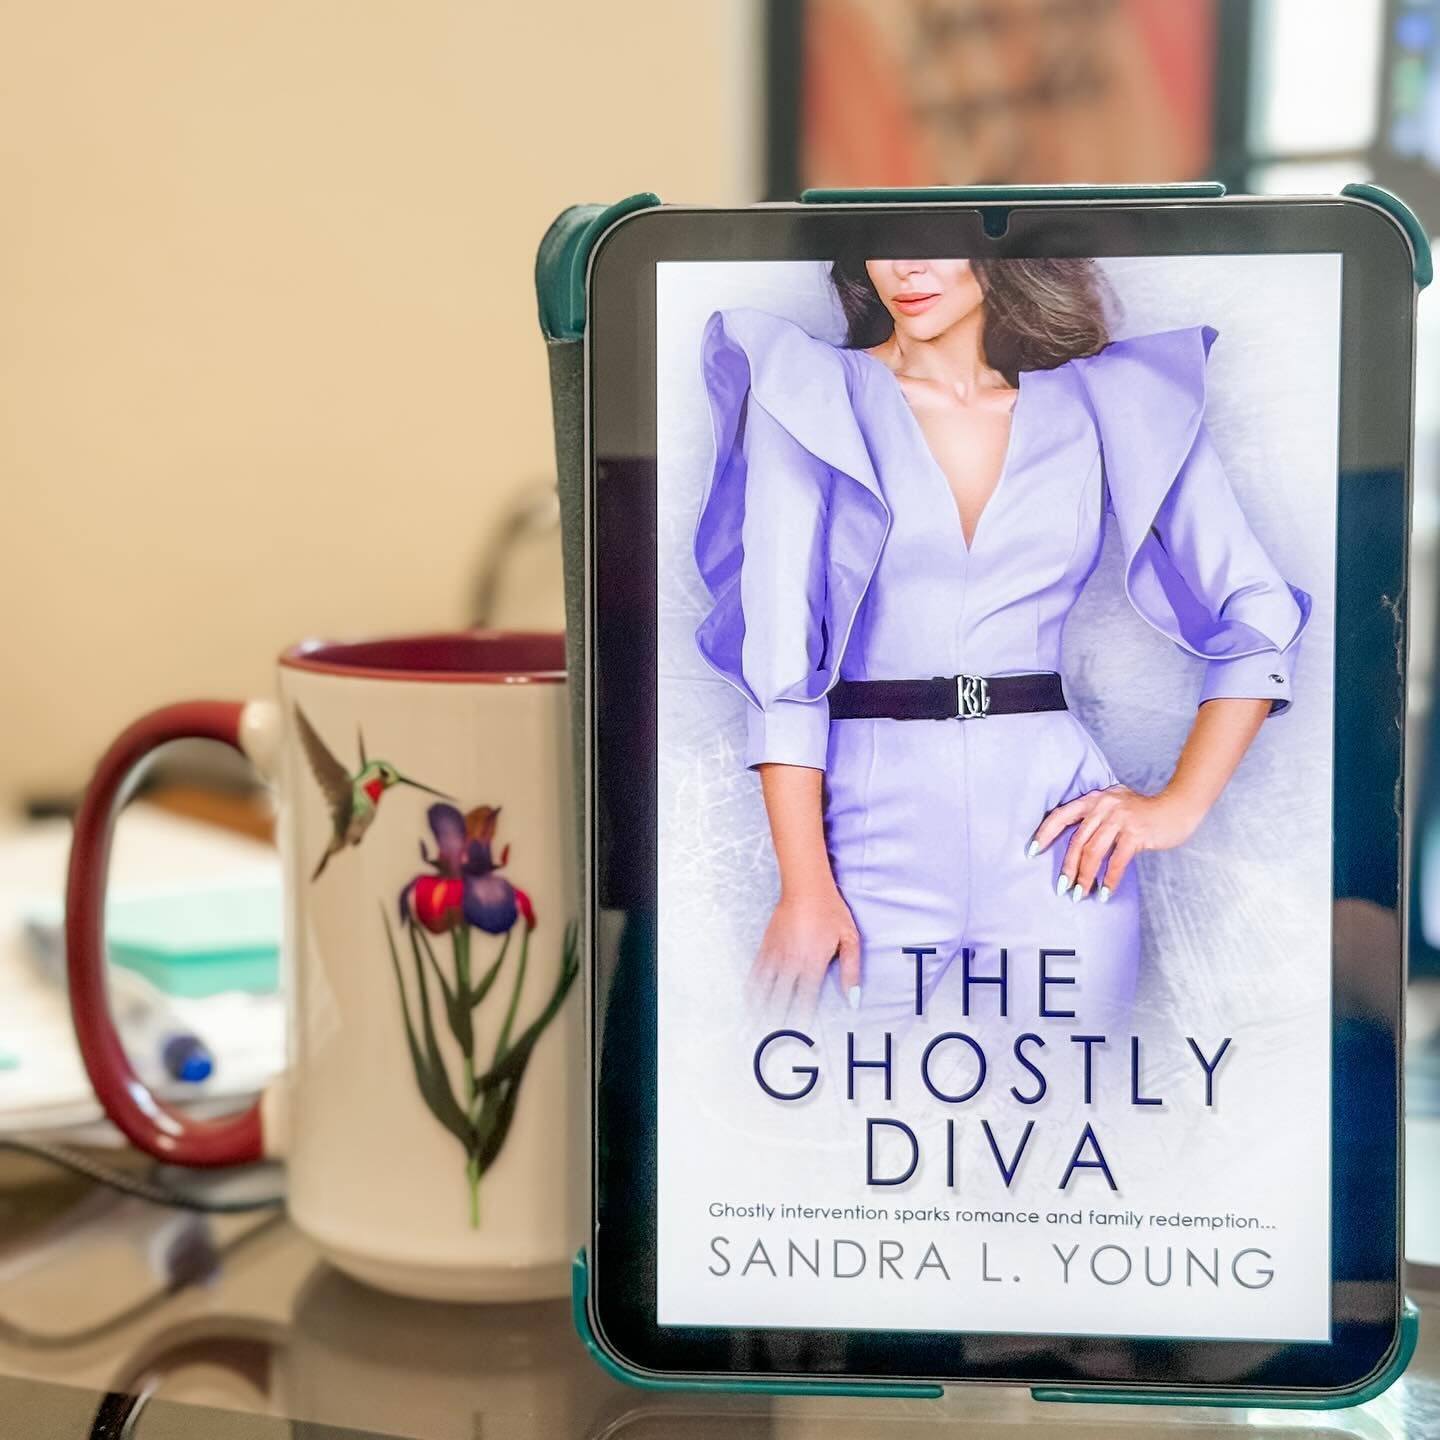 ✨New on my kindle today! ✨

The third book in @sandrayoung_author &lsquo;s Divine Vintage series (of 3 interconnected novels), that I&rsquo;ve enjoyed - with ghostly elements, dual timelines delving into the past, vintage fashion and a good dash of r